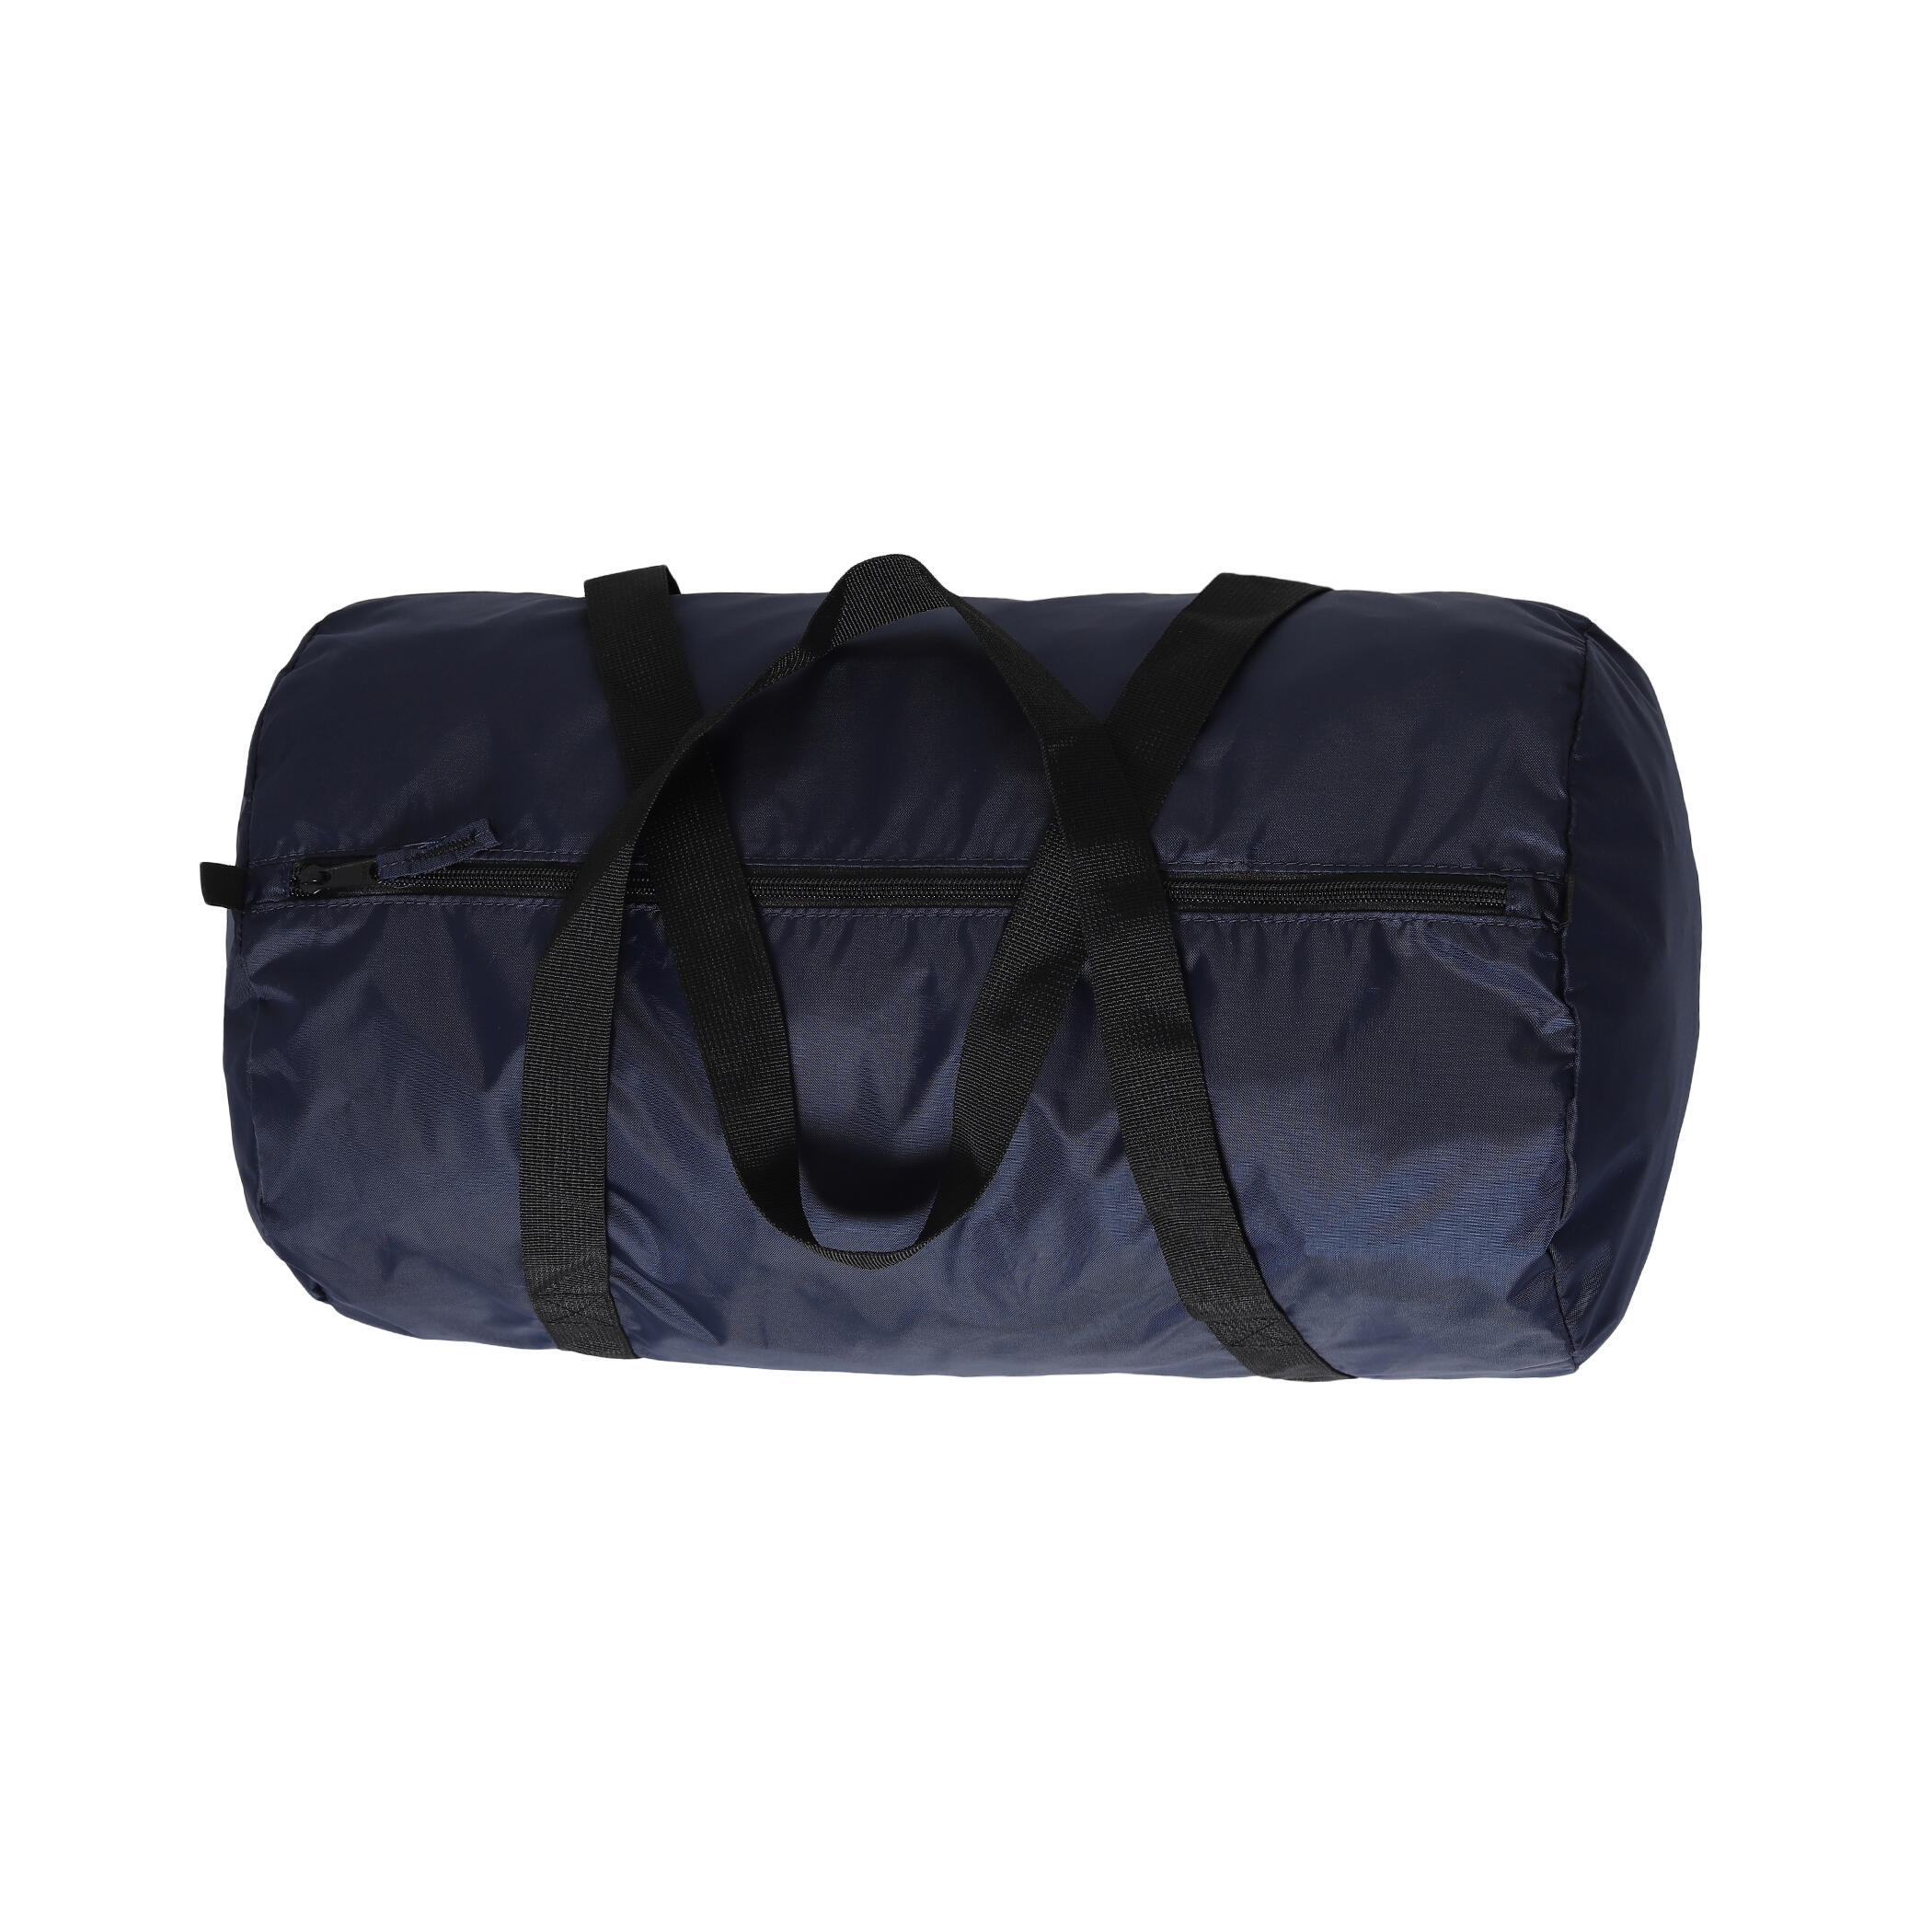 Buy Duffle bags at Best Prices Online in India